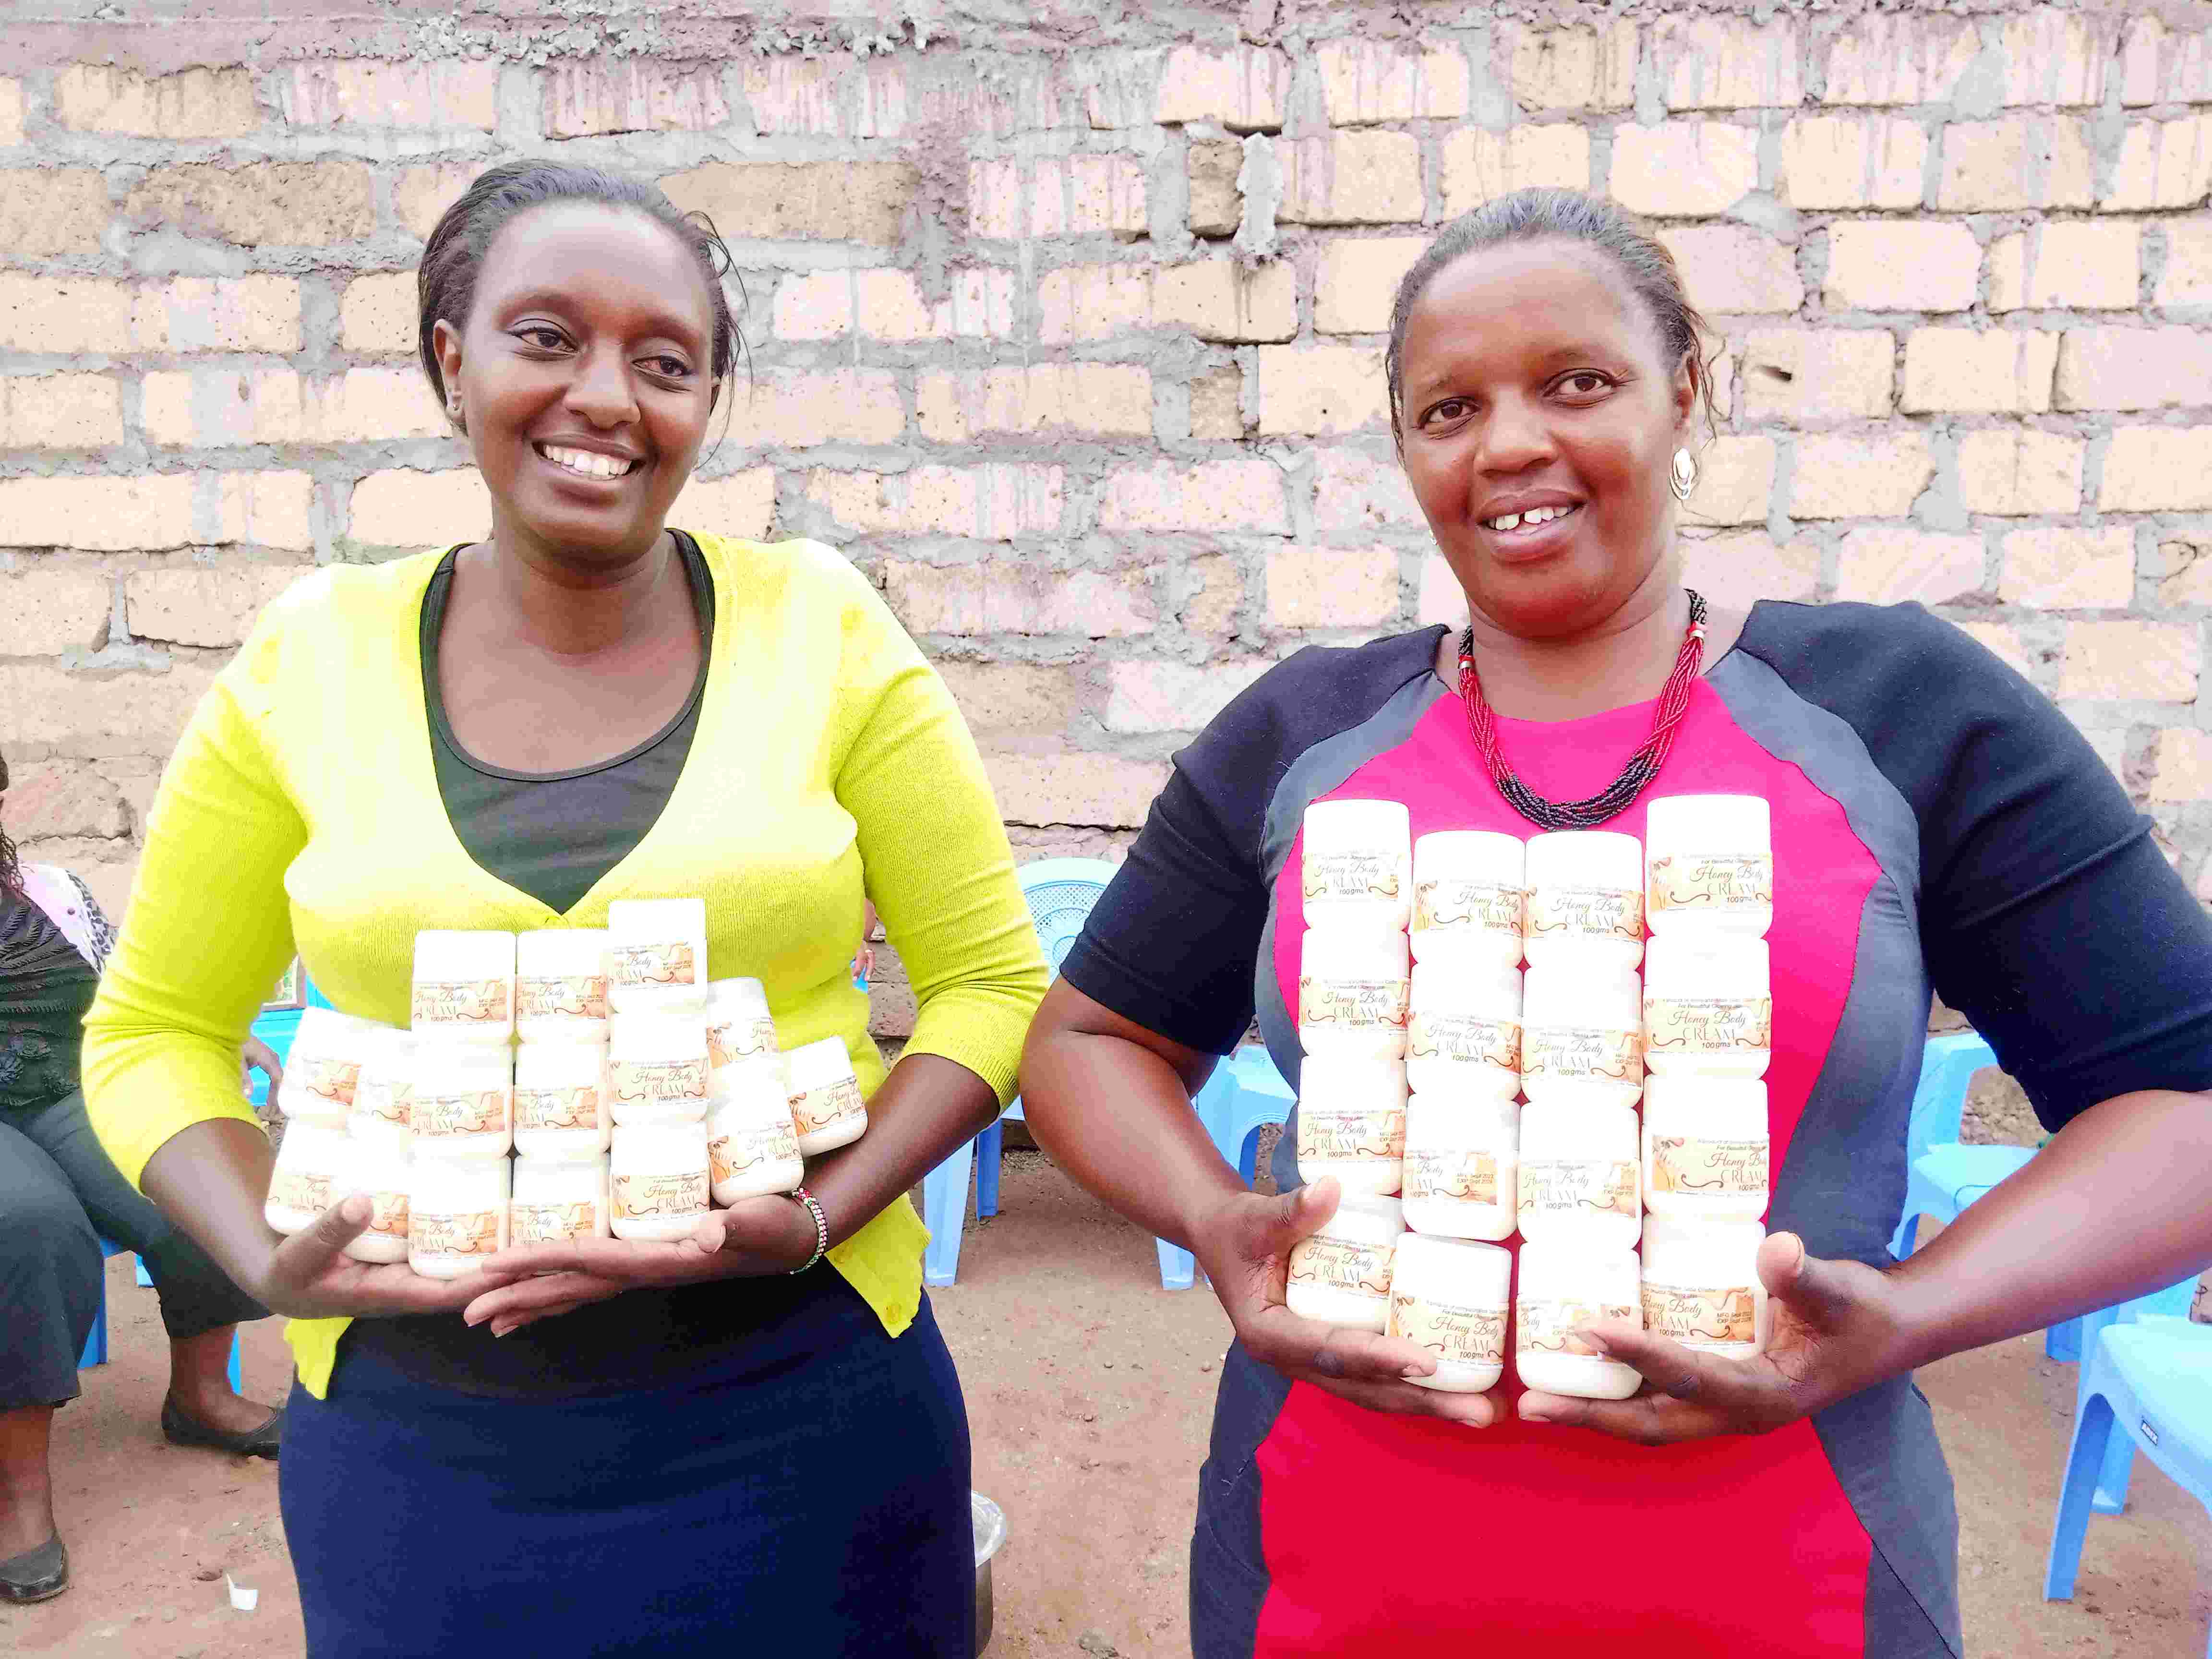 Isiolo women profit from the lucrative honey products business